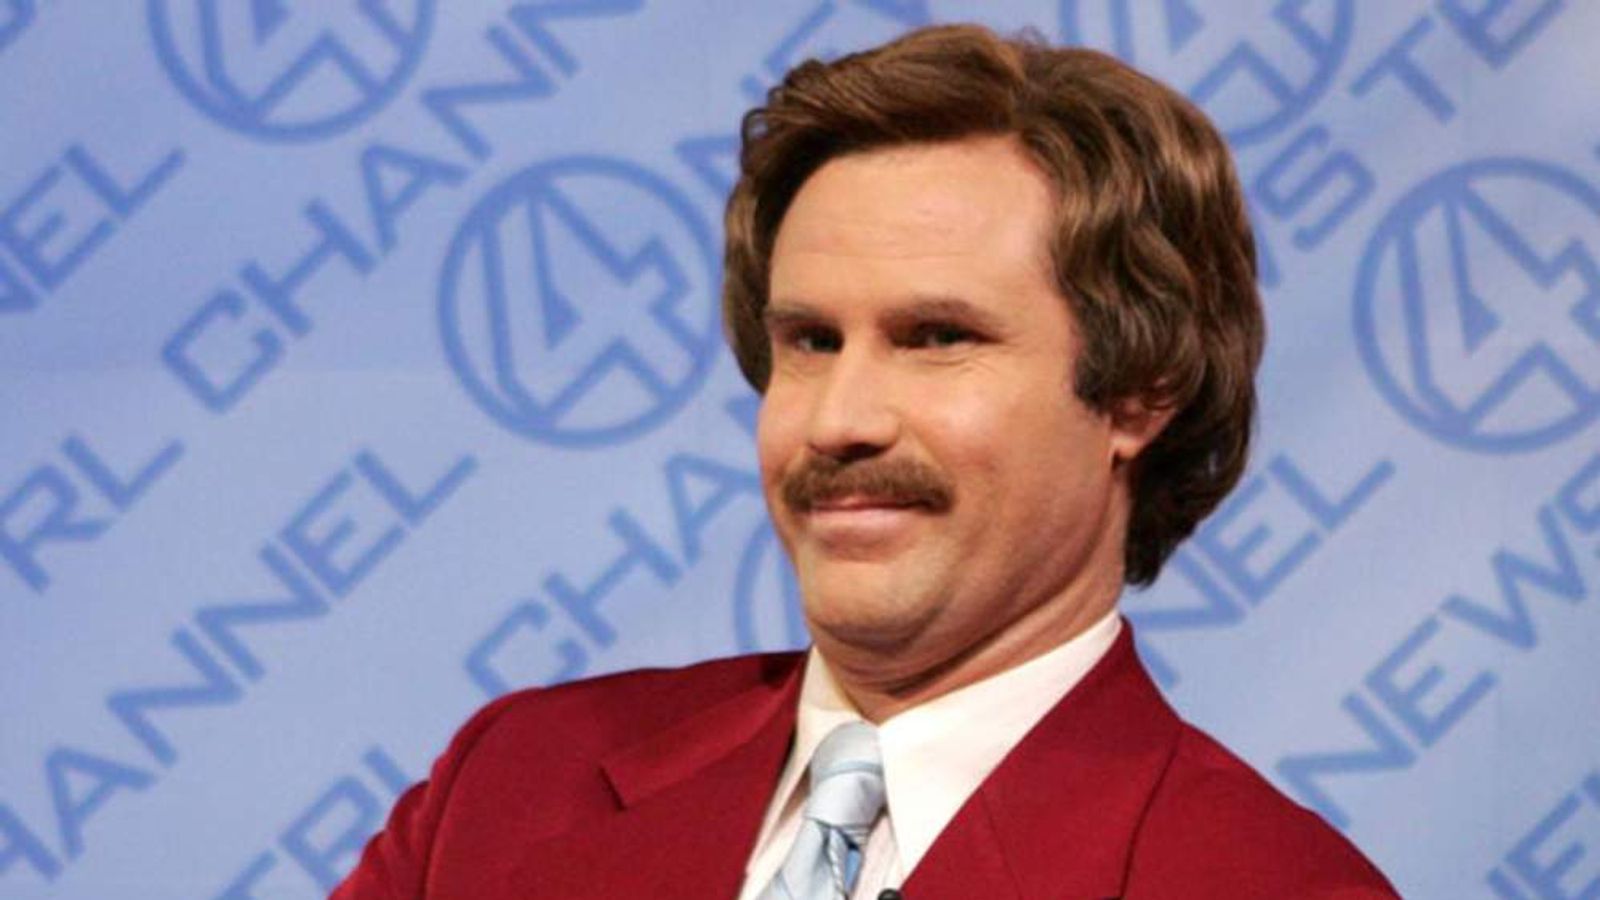 ron-burgundy-getting-the-museum-treatment-us-news-sky-news